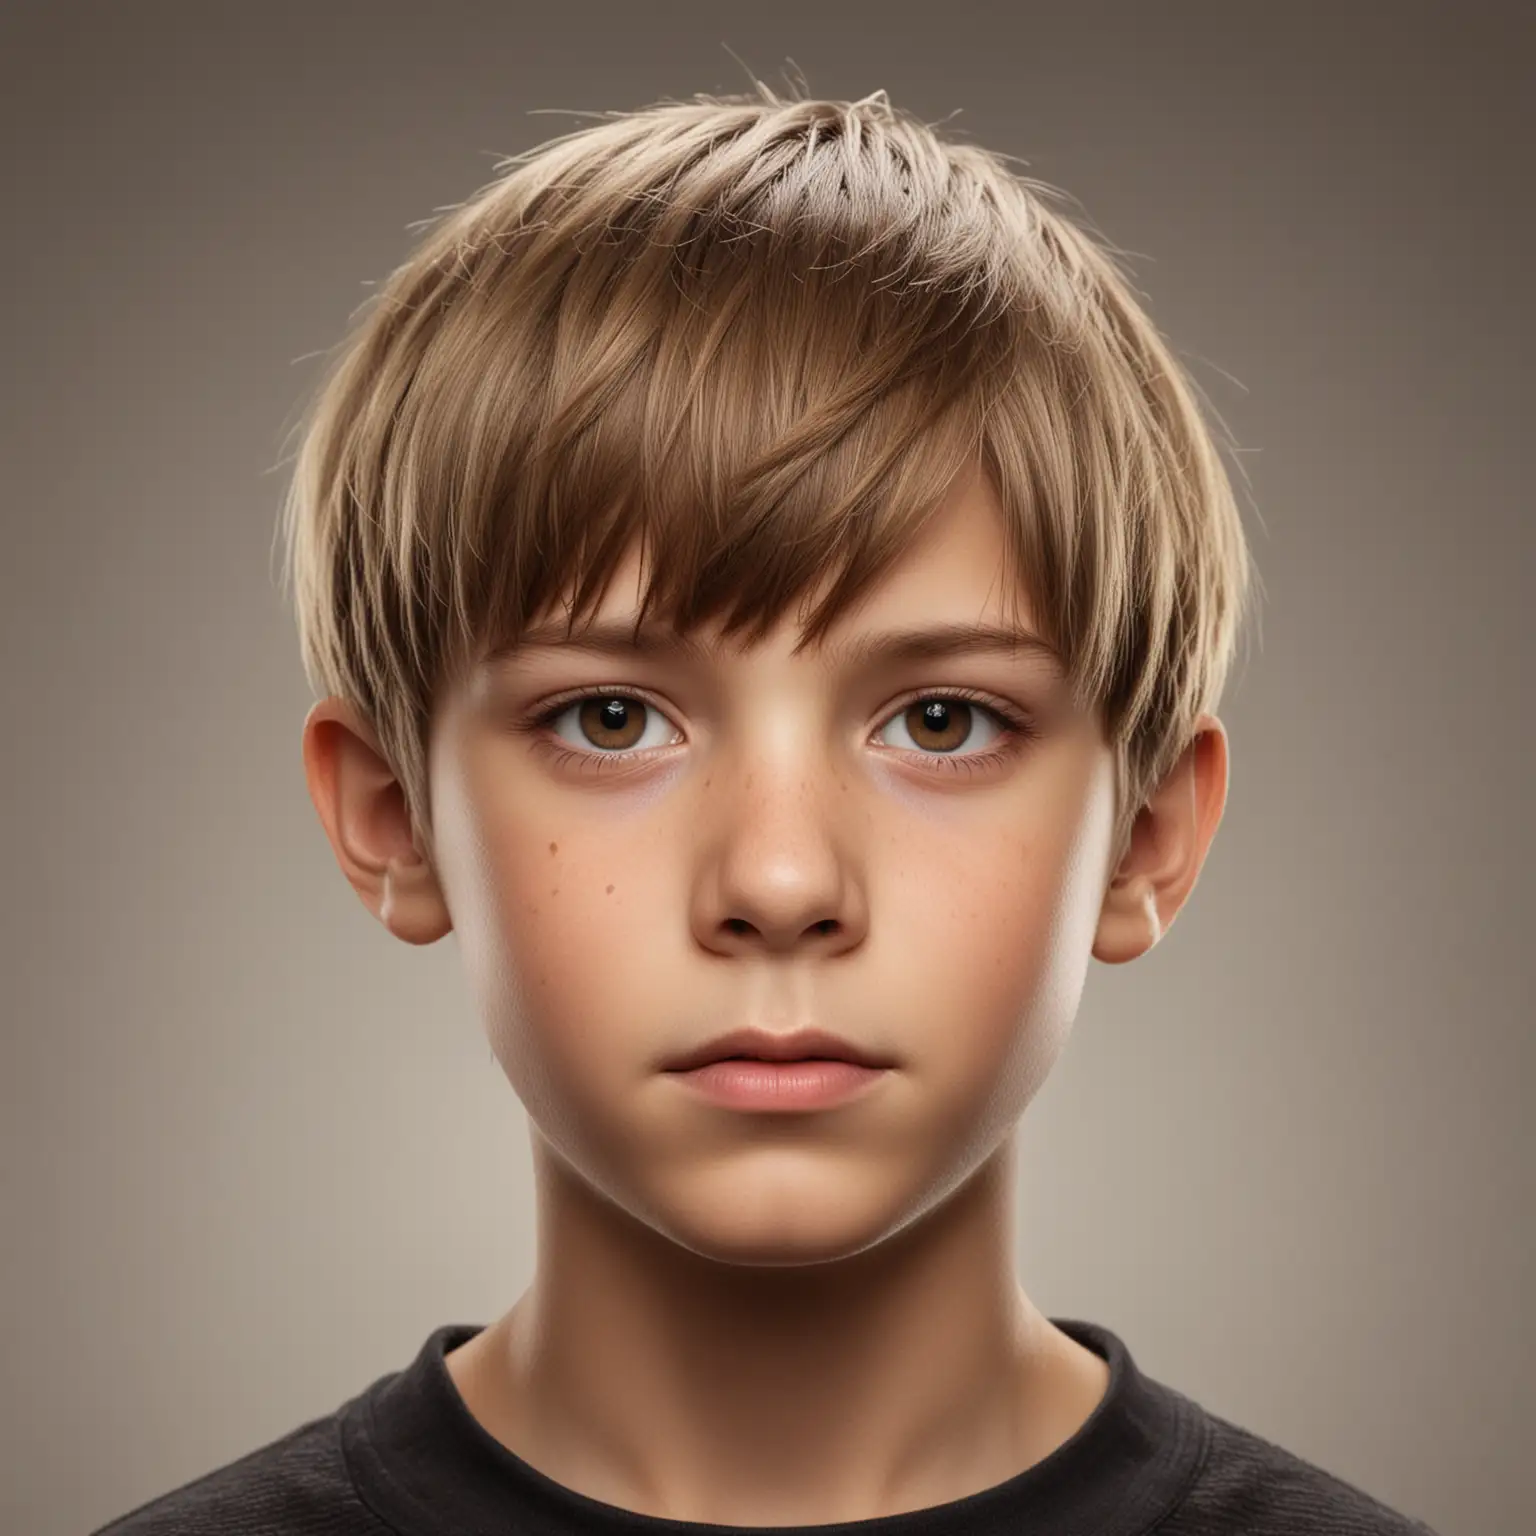 Hyper realistic, studio quality photo of  eleven year old boy with shiny hair, light brown bowl hair cut, headshot, view from side of face